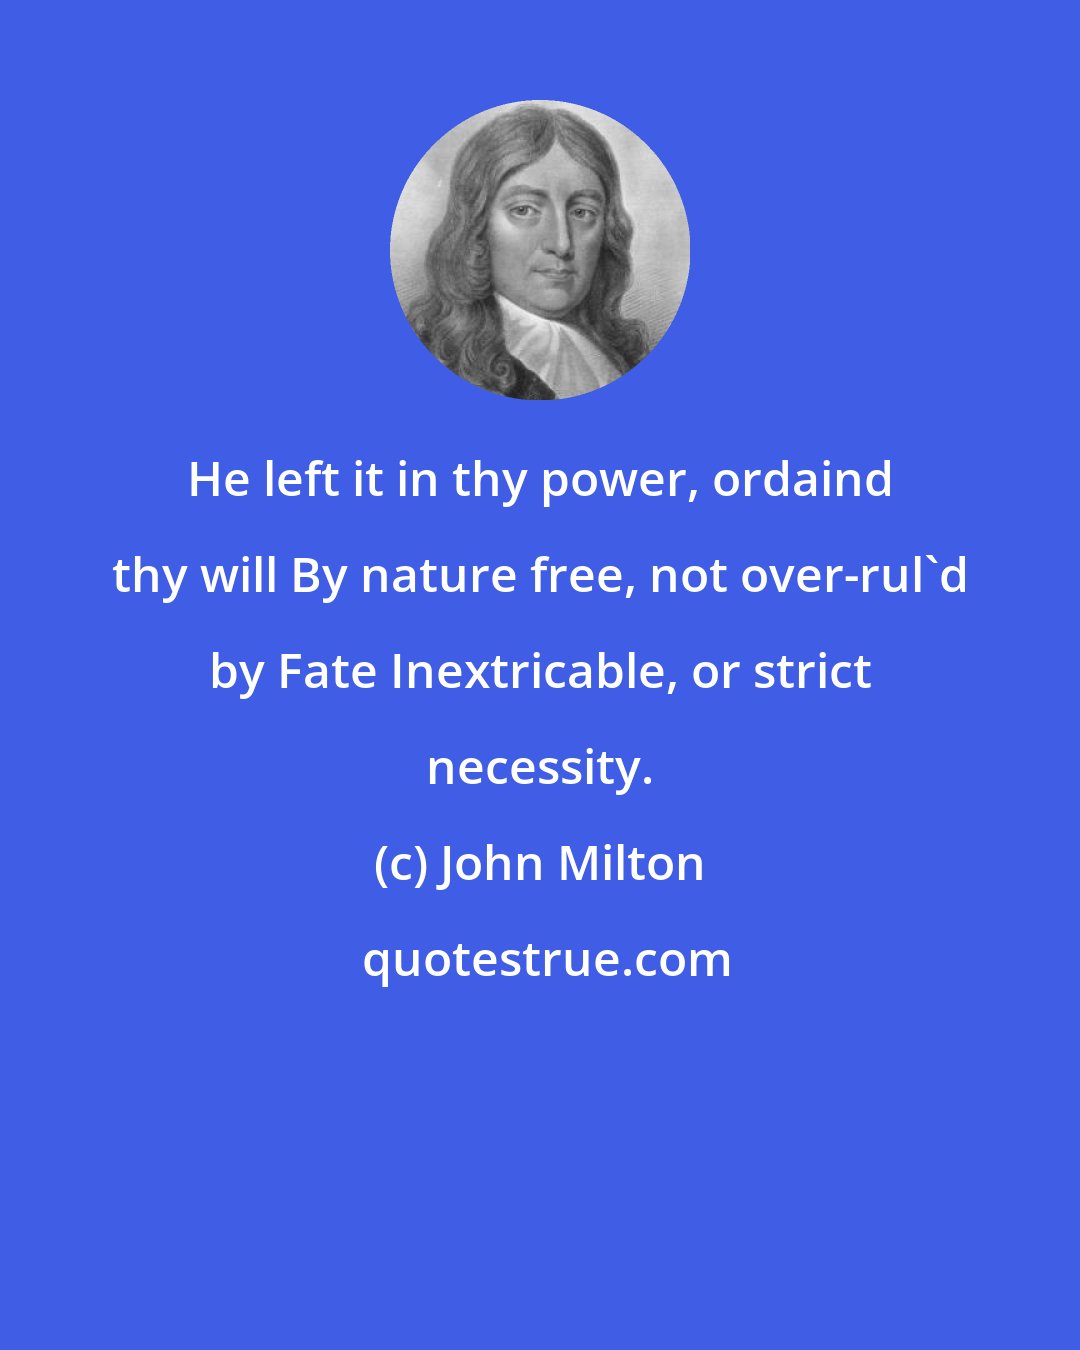 John Milton: He left it in thy power, ordaind thy will By nature free, not over-rul'd by Fate Inextricable, or strict necessity.